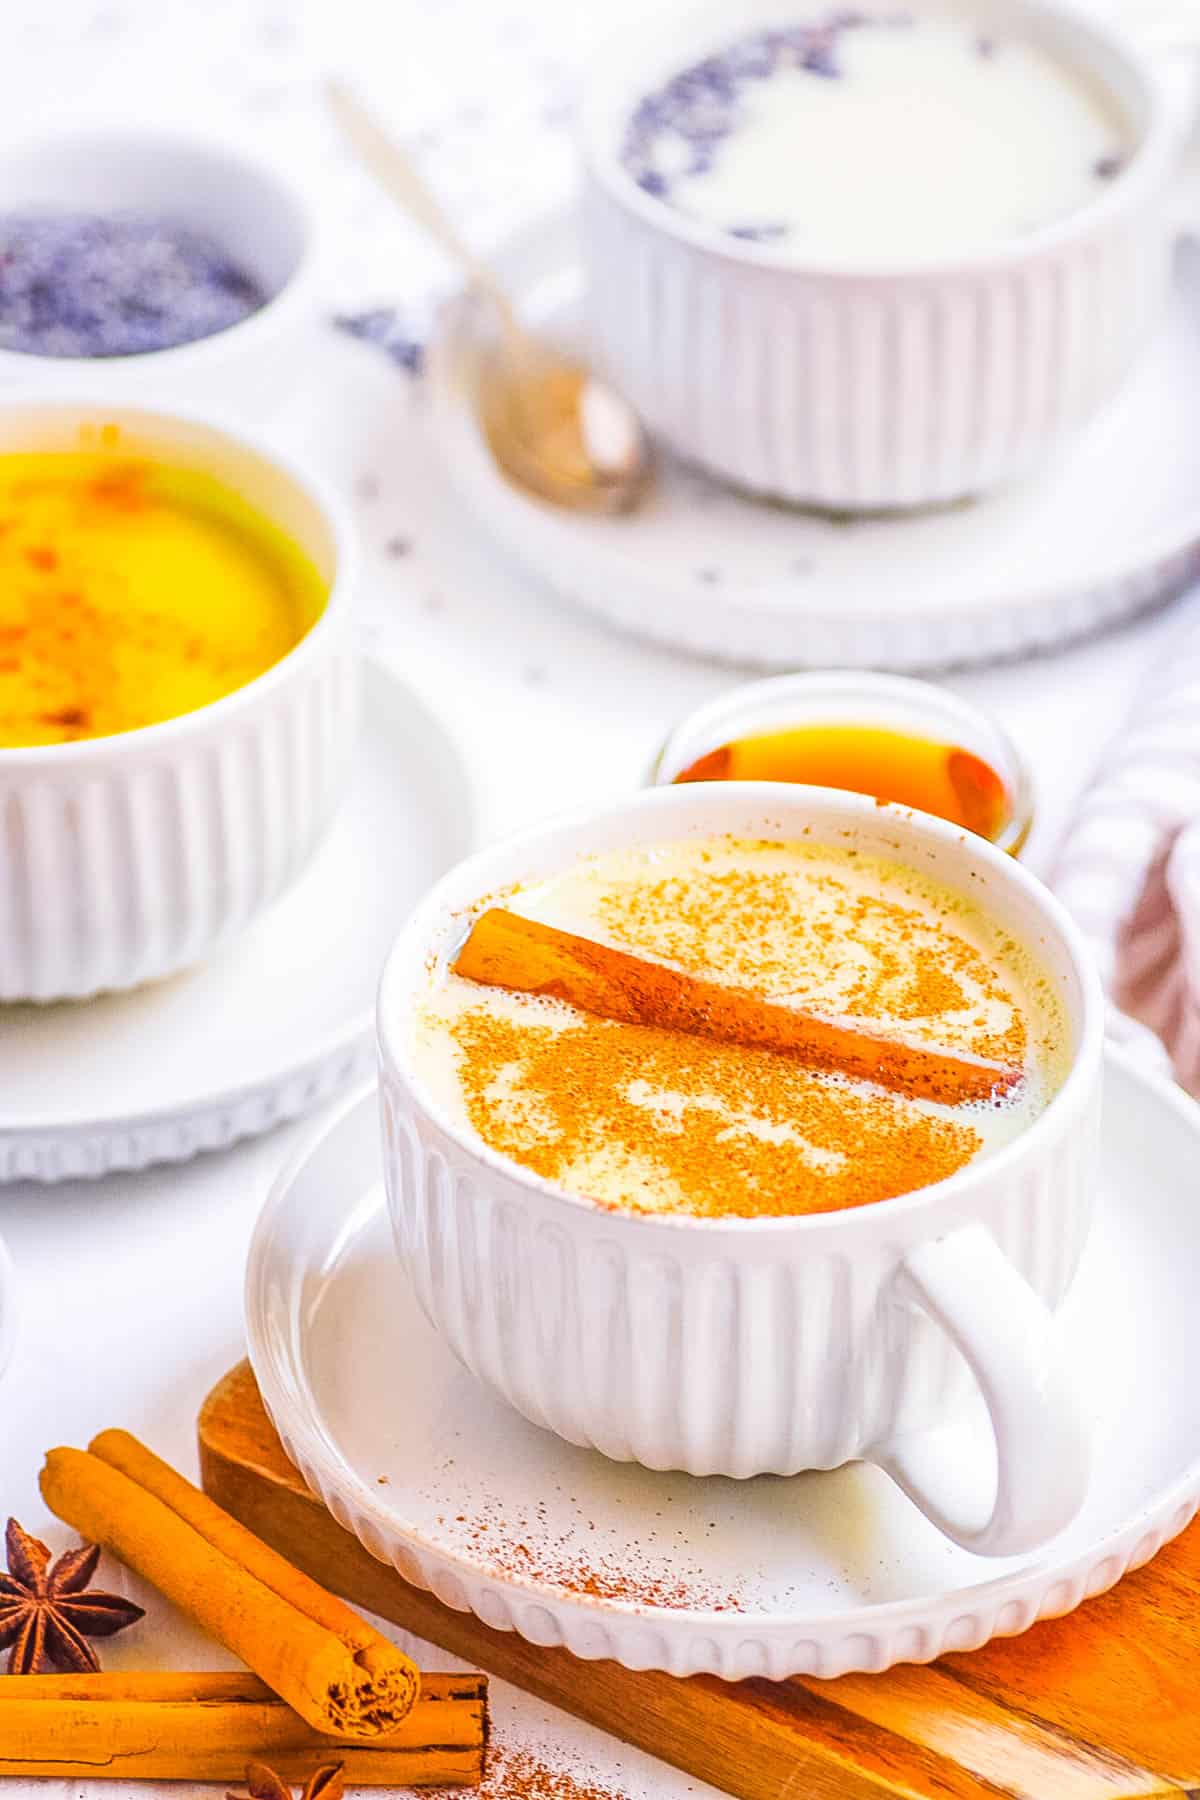 Easy moon milk recipe served 3 ways - turmeric, lavender and chai flavored.